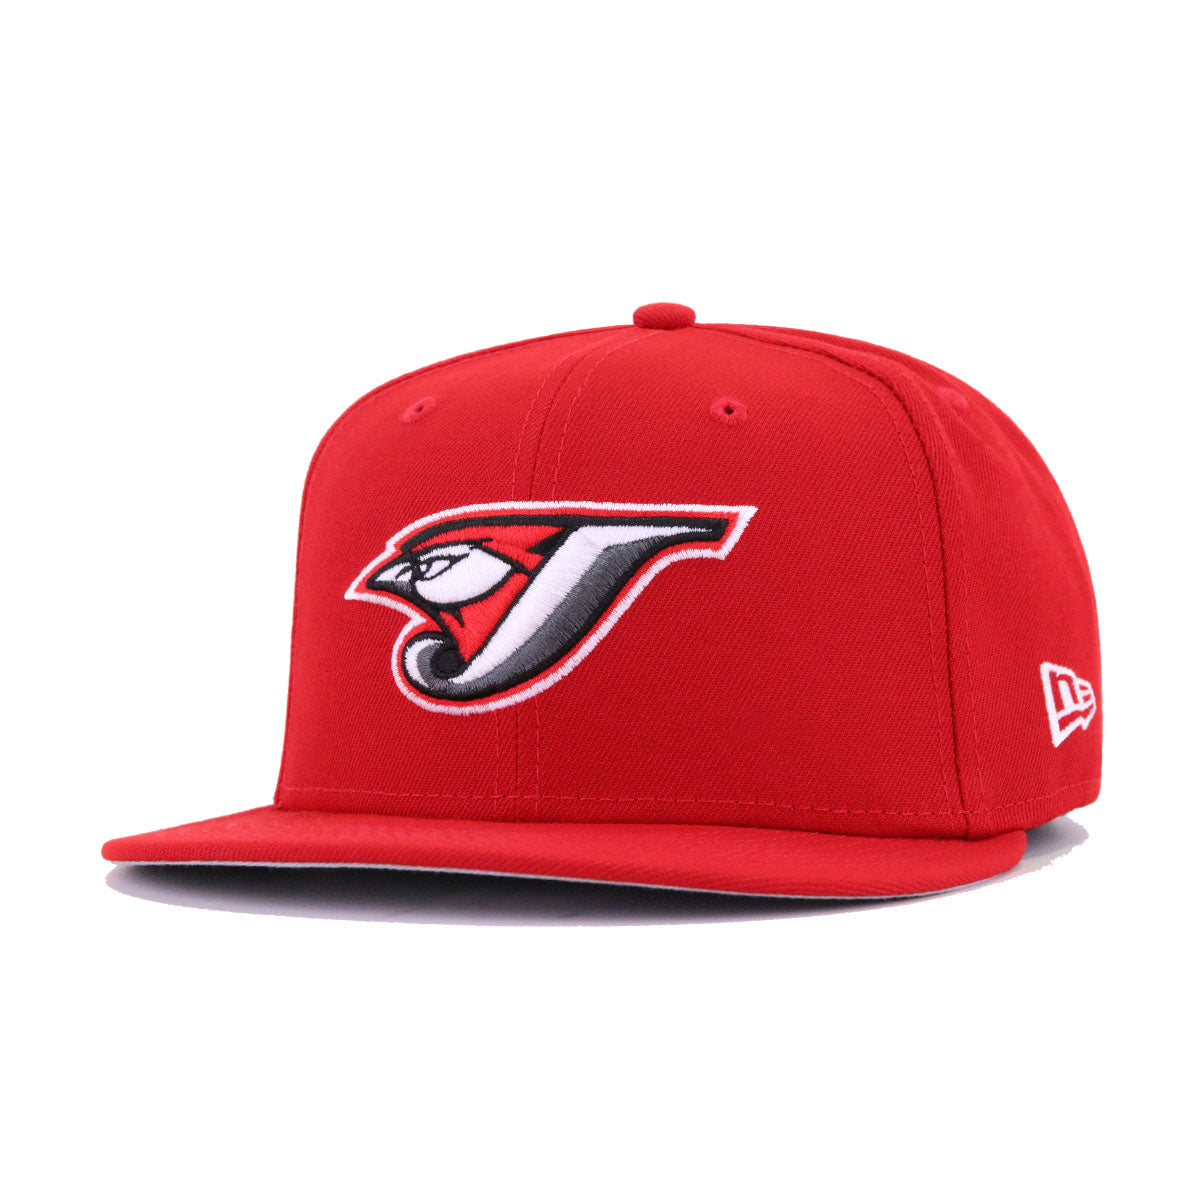 Shop Toronto Blue Jays Snapback Hats & Fitted Caps